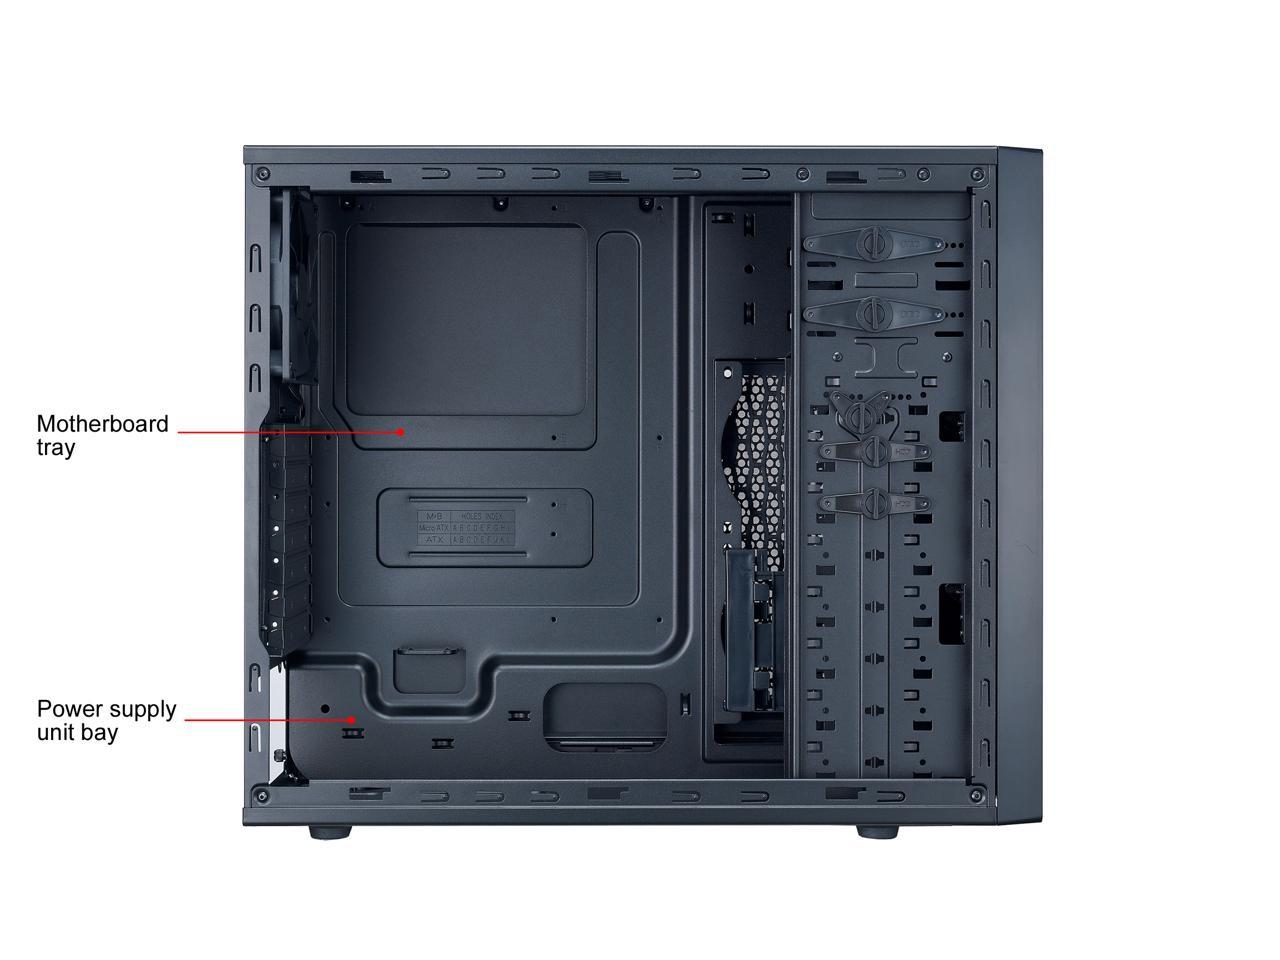 Cooler Master N400 NSE-400-KKN2 N-Series Mid Tower Computer Case with ATX Motherboard Support, Multiple 240mm Radiator Support, and Ventilated Front Panel